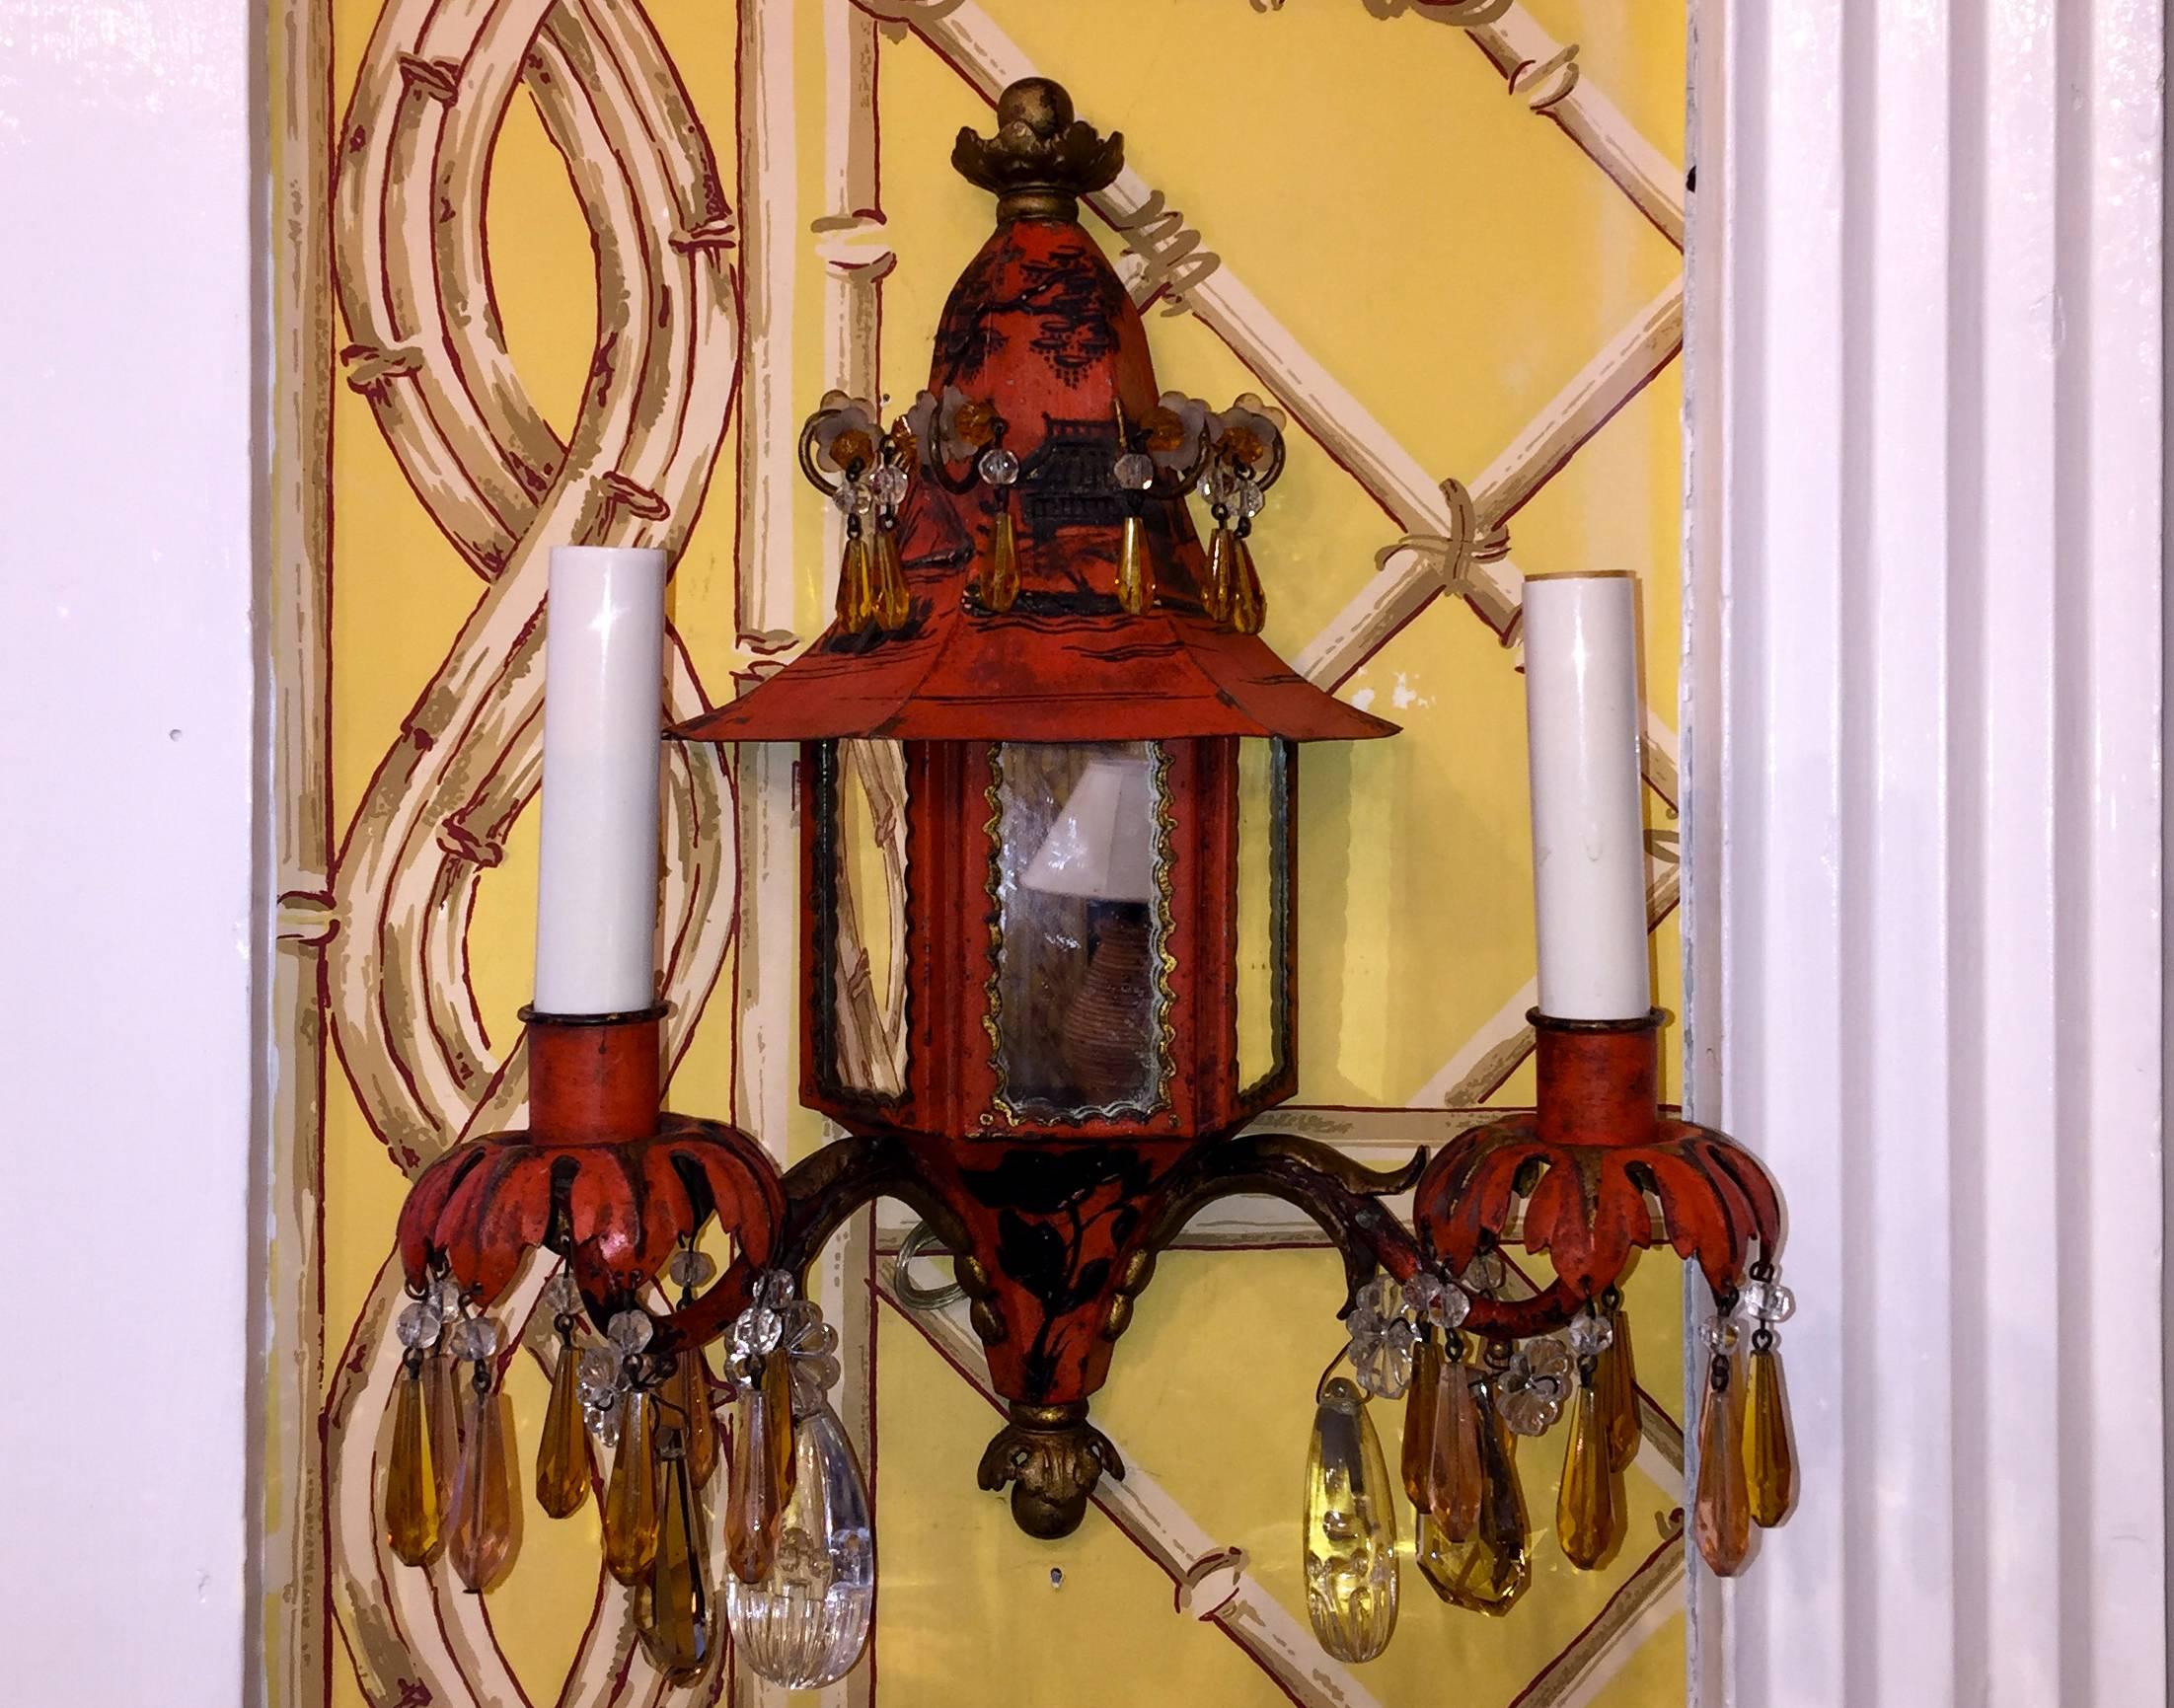 Pair of 19th century French Napoleon III chinoiserie style tole sconces with
pagoda form and original crystals.